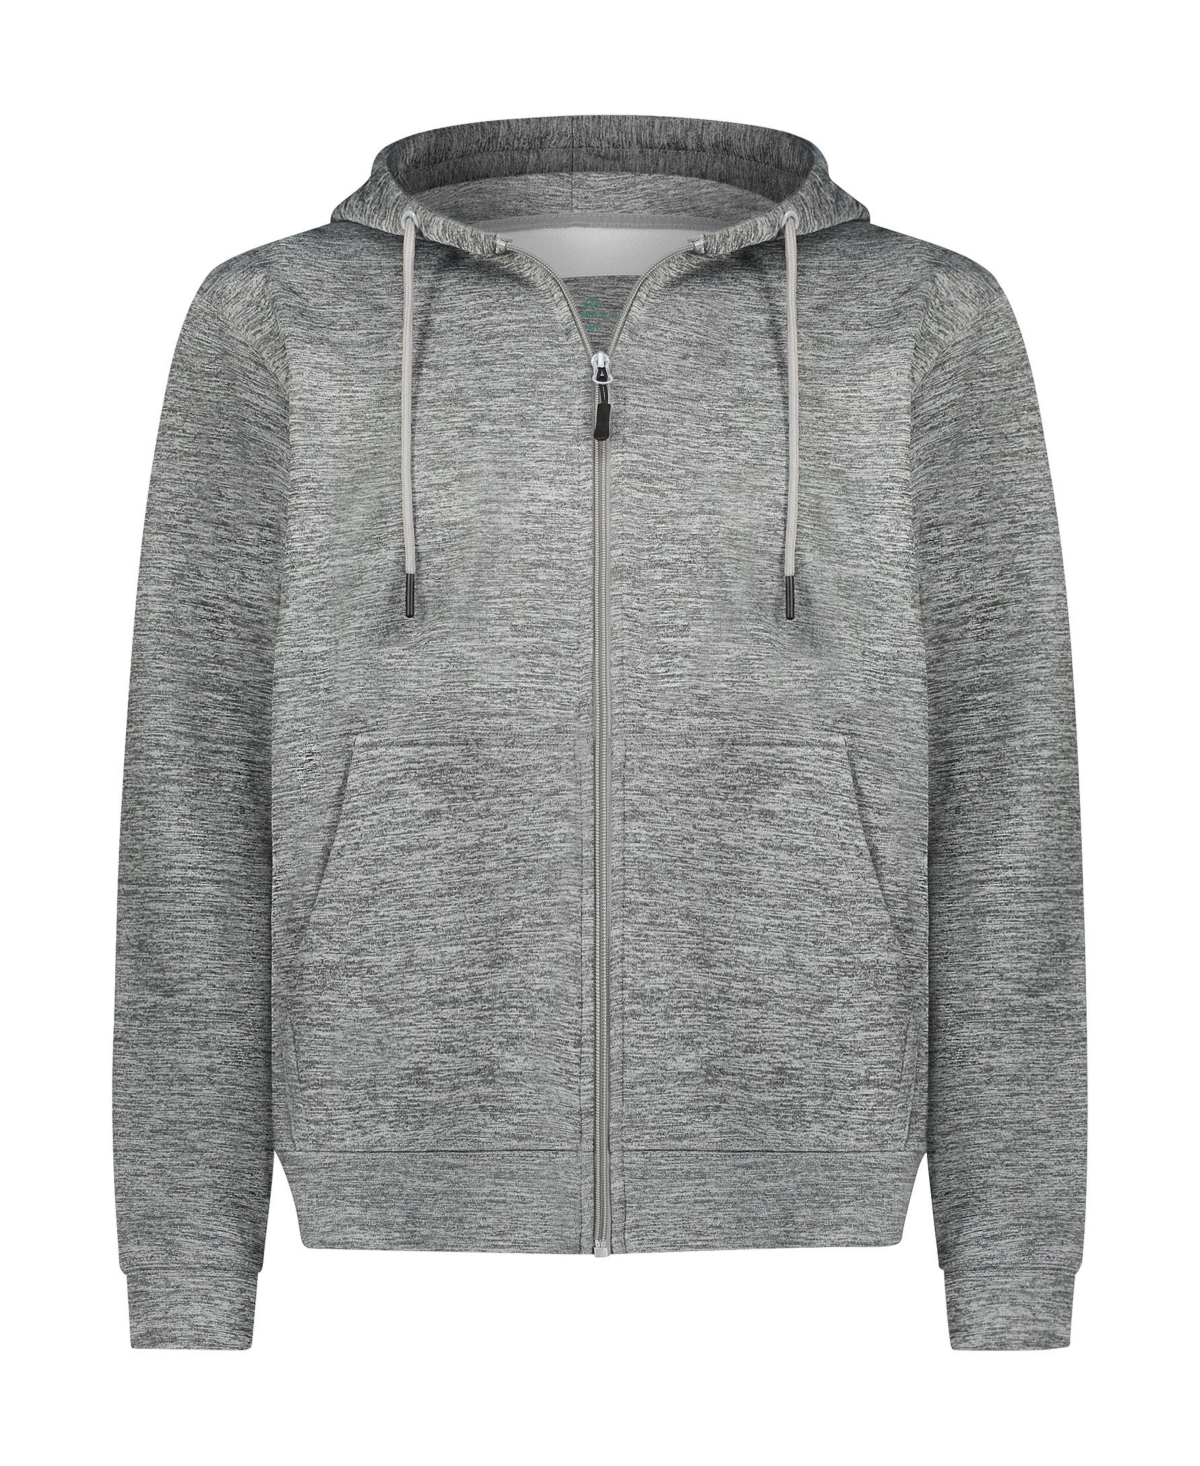 Premium Zip-Up Hoodie for Men with Smooth Silky Matte Finish & Cozy Fleece Inner Lining - Men's Sweater with Hood for Big & Tall - Halo grey